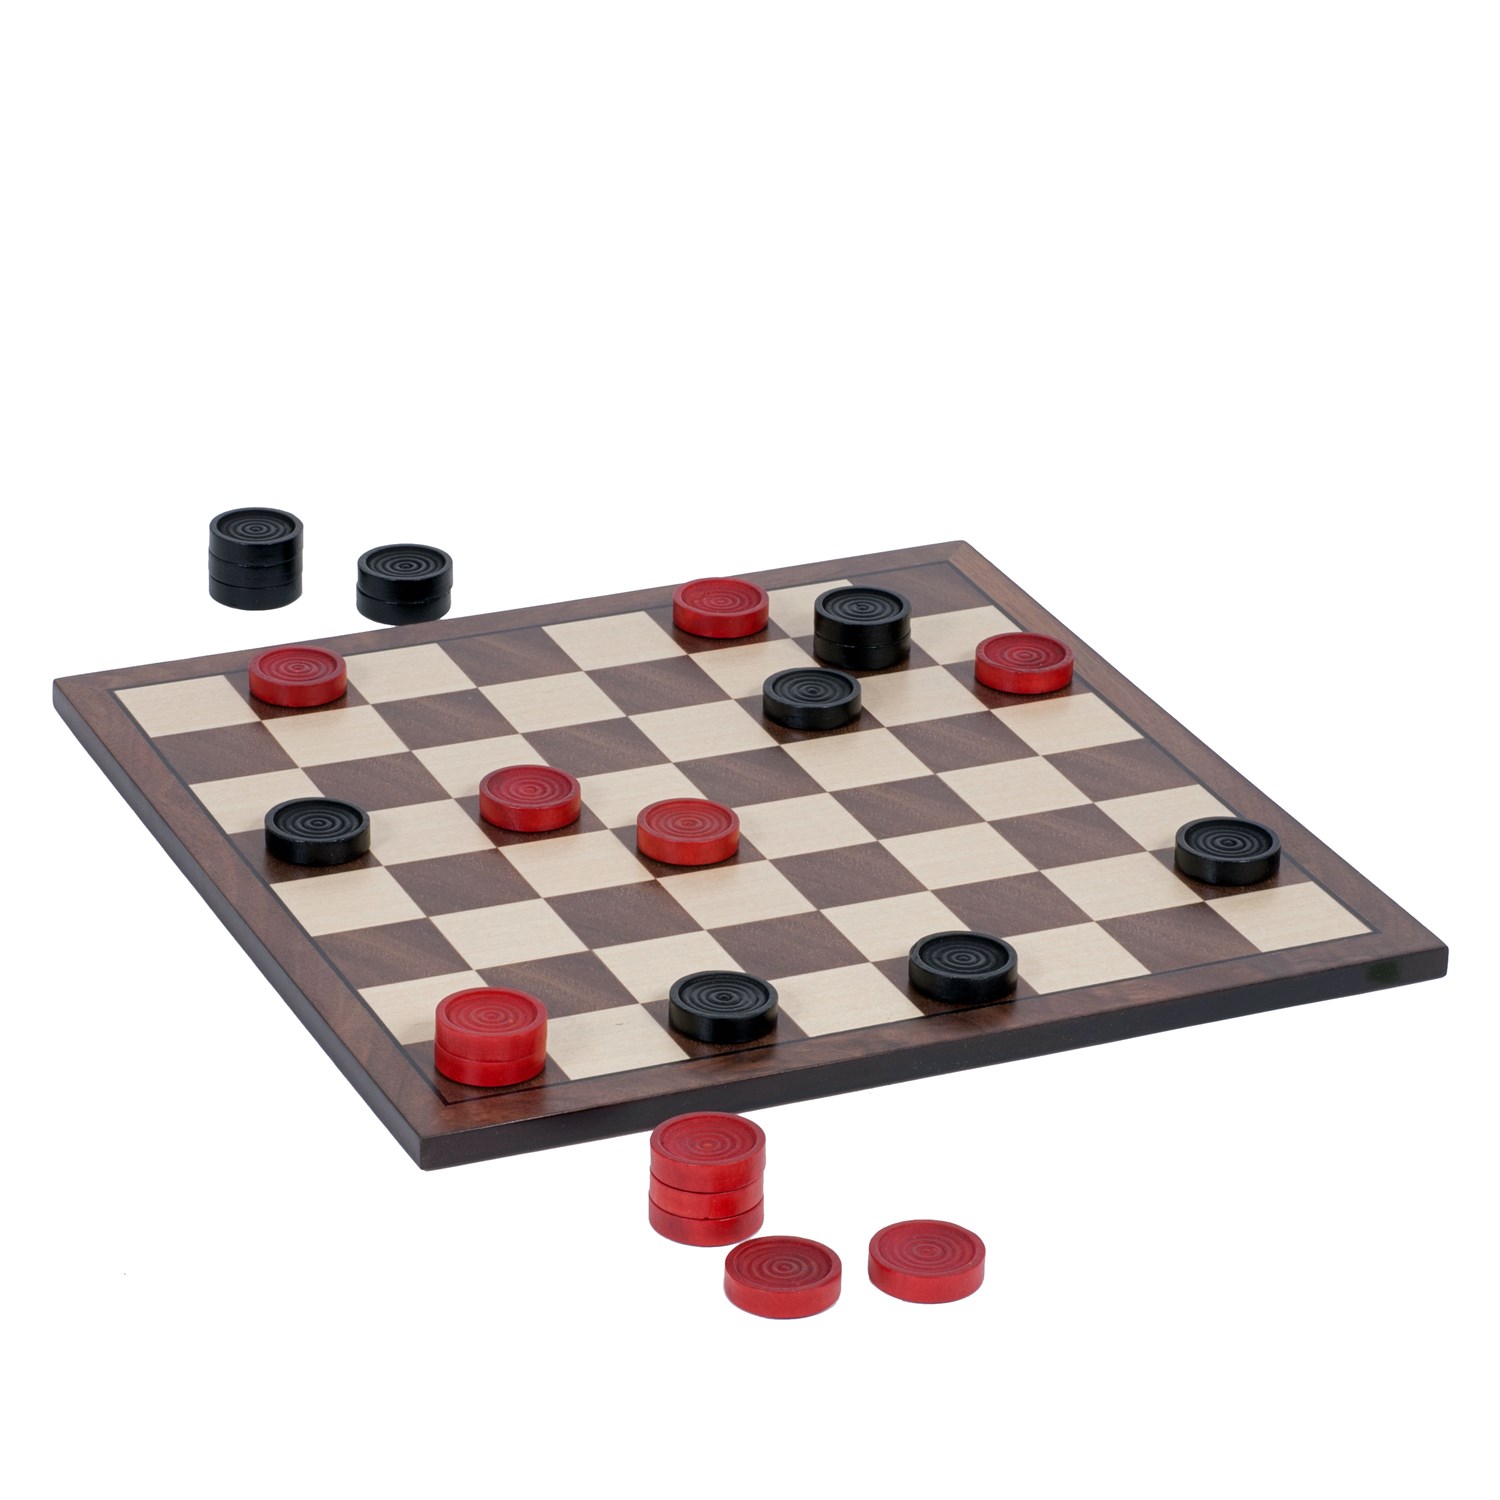 24 Wooden Checkers 12 Red 12 Black Wood Stacking Pieces 1.25" 